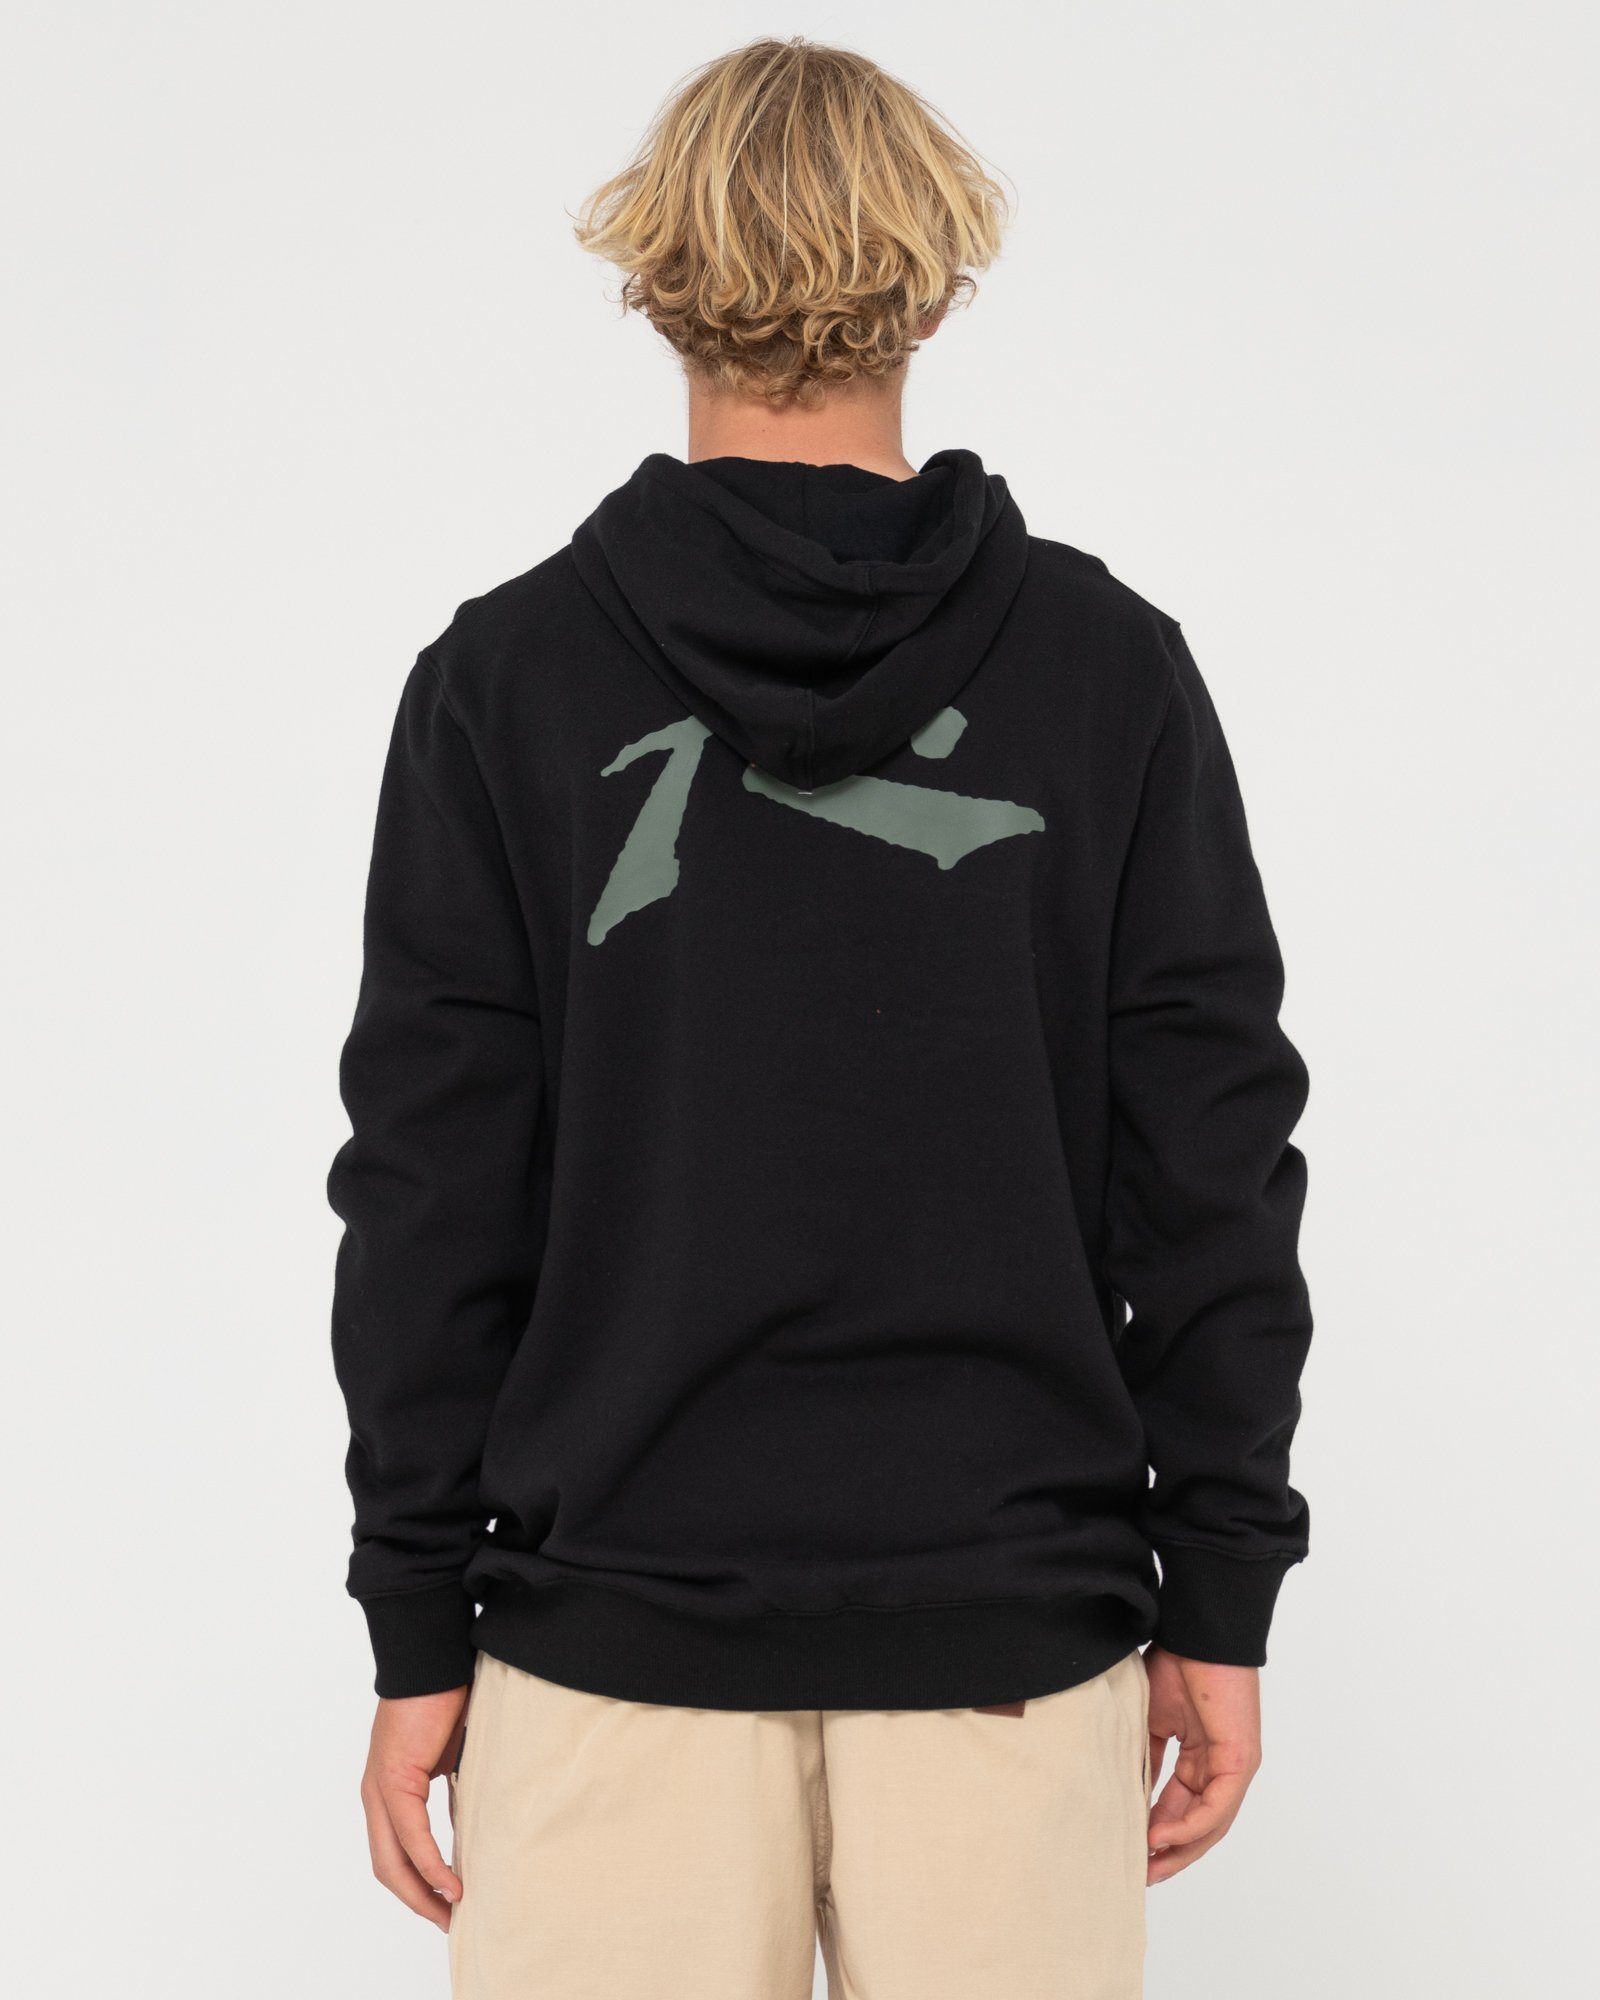 Rusty COMPETITION Black/Shadow HOODED Army Hoodie FLEECE